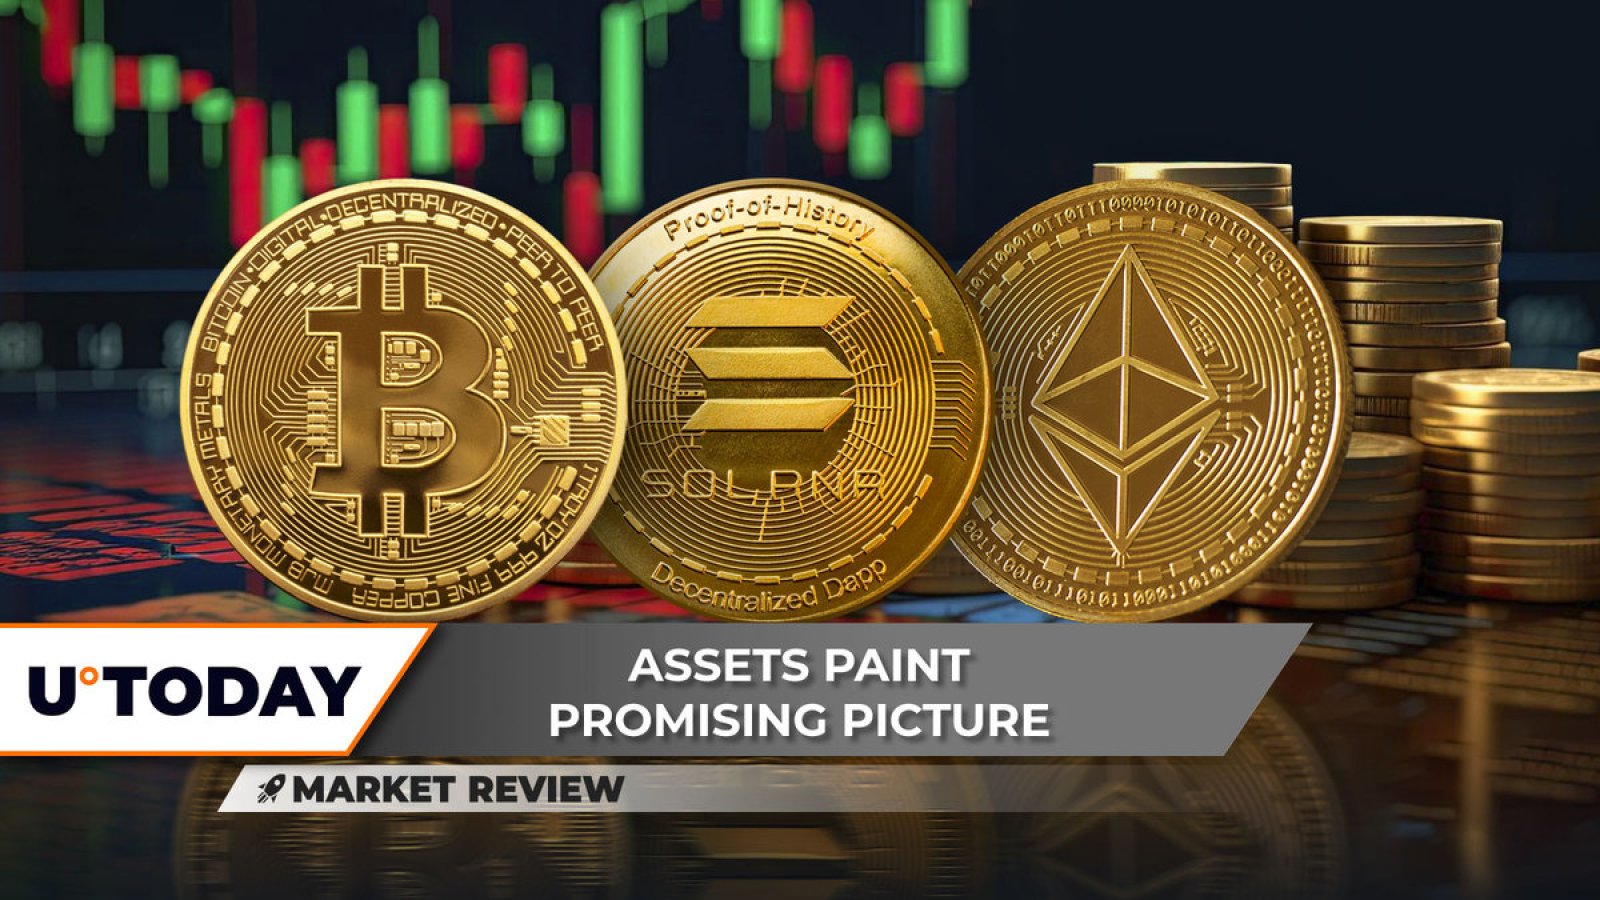 Will Bitcoin (BTC) test ATH again?  Solana (SOL) Rising Doesn't Stop, Ethereum (ETH) Paints Symmetrical Triangle Pattern